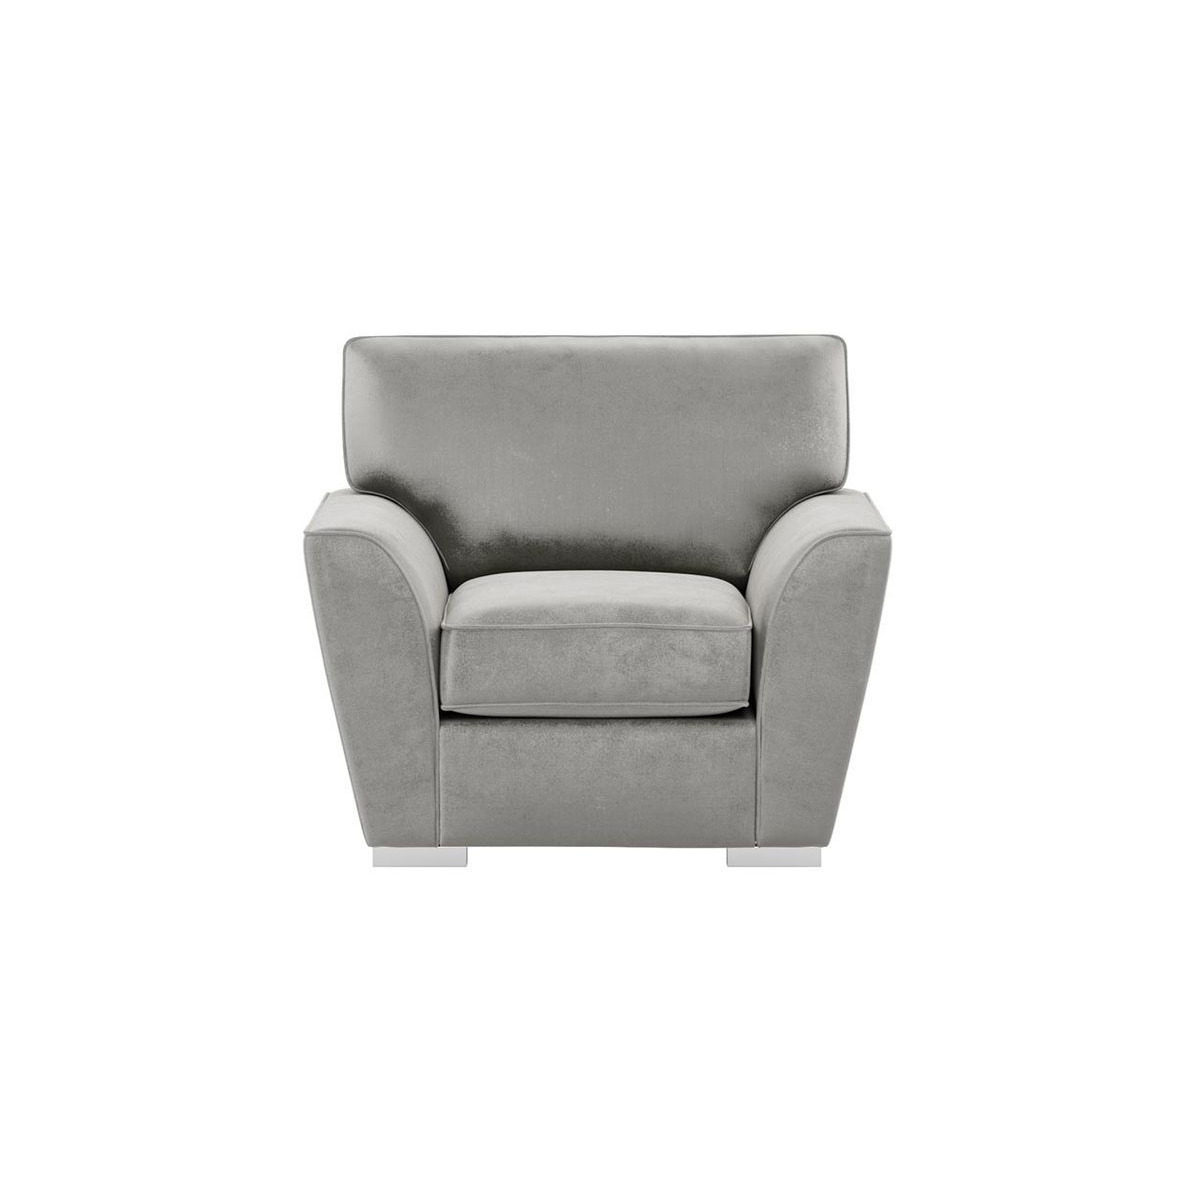 Majestic Armchair, silver - image 1